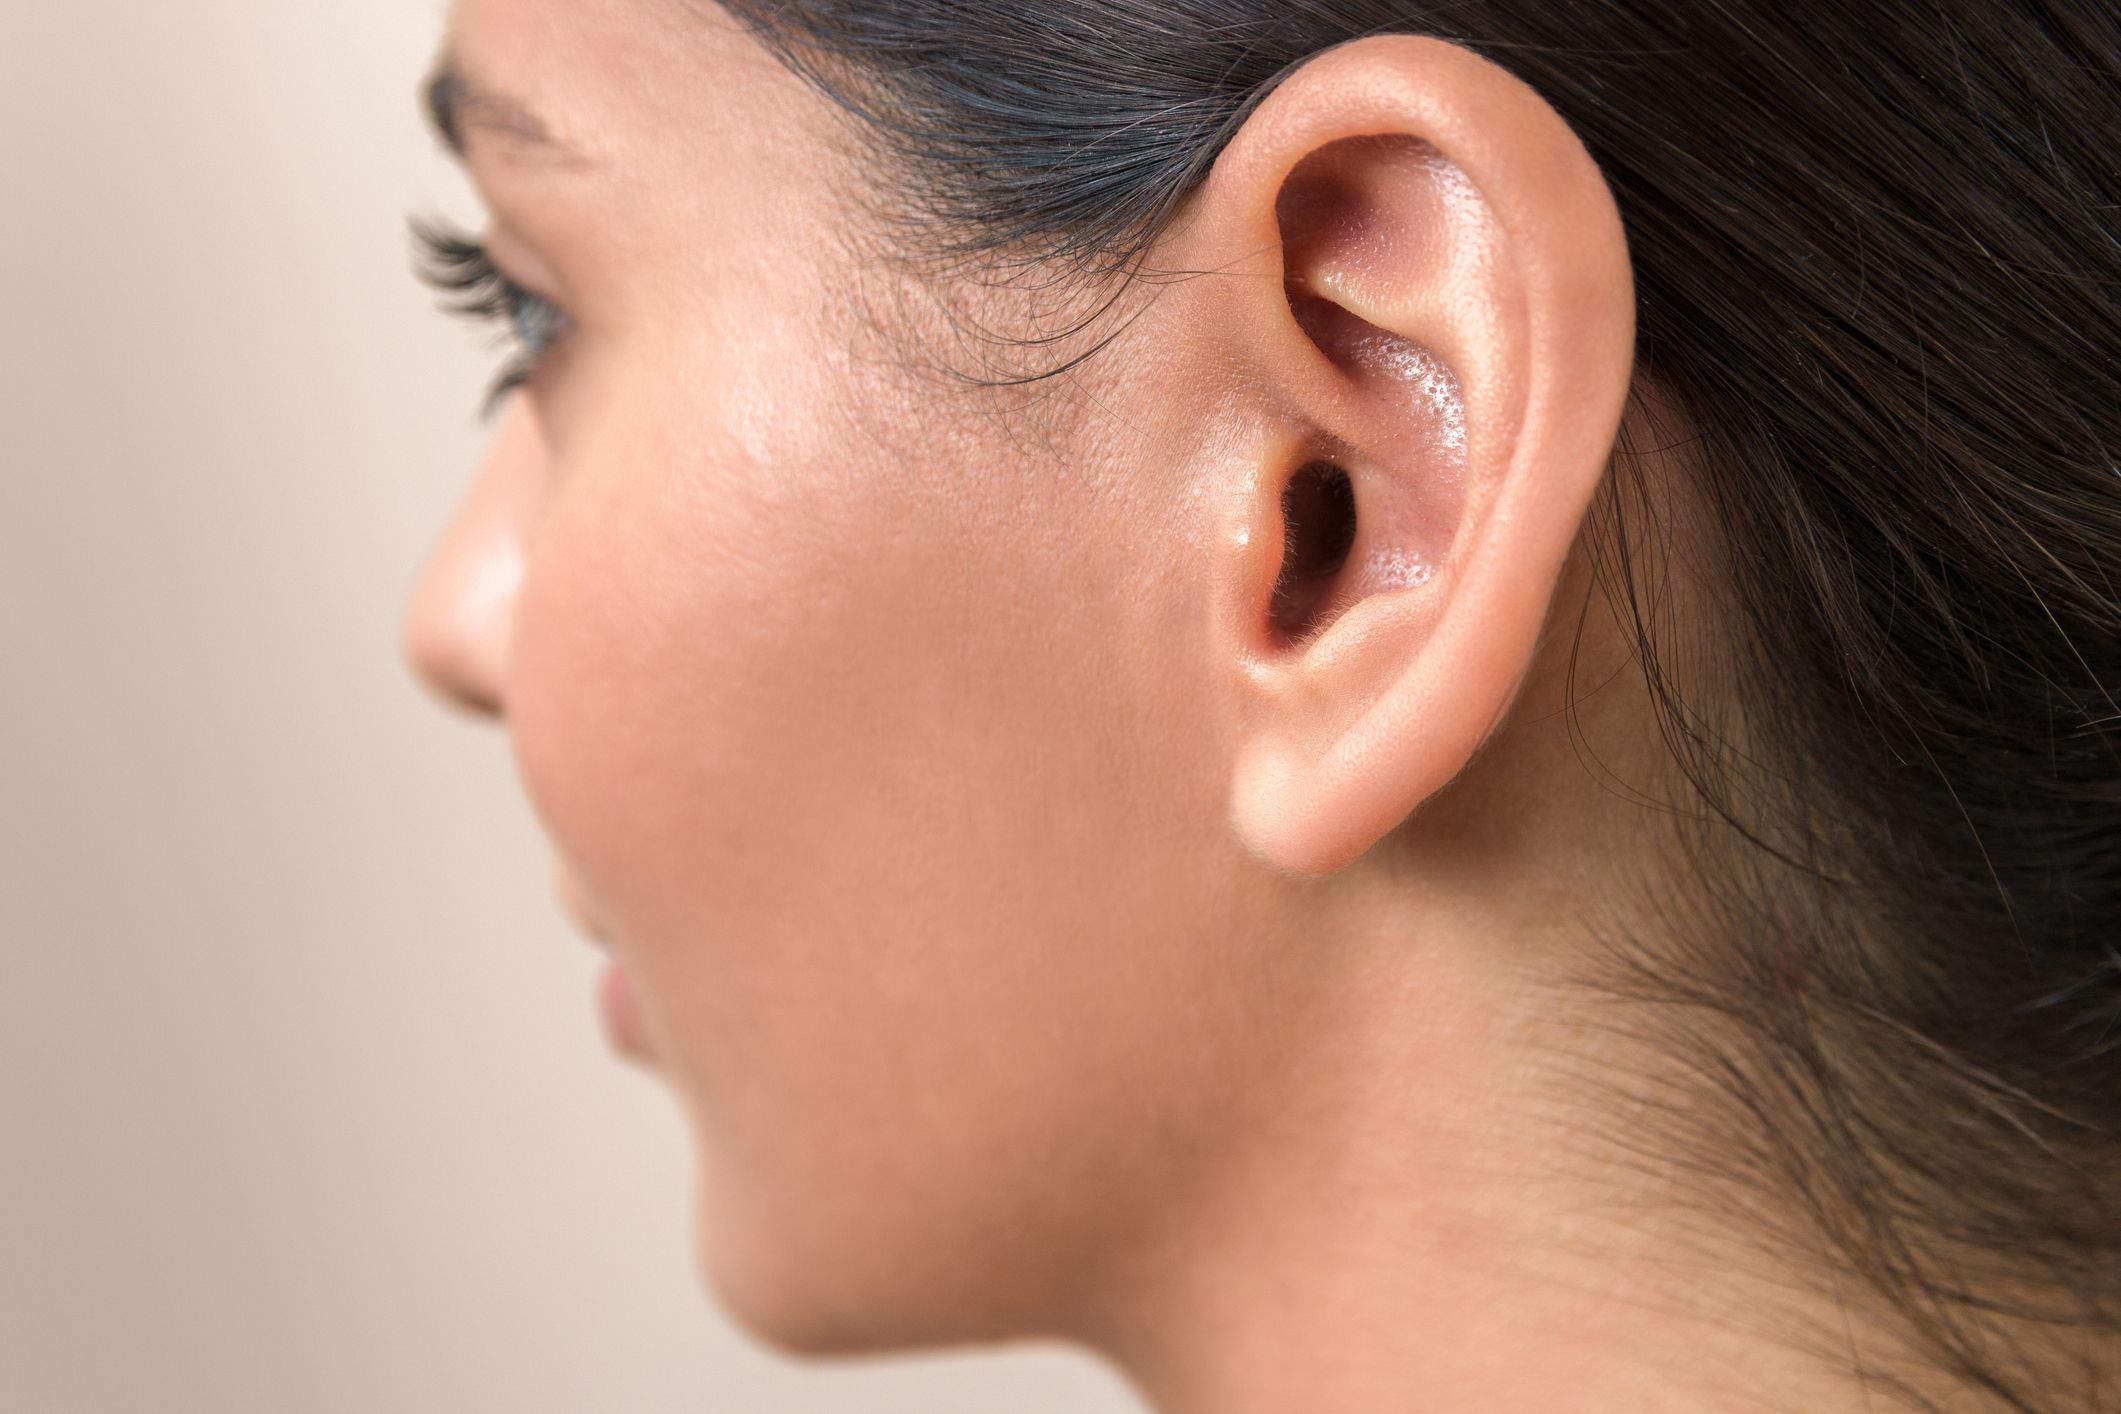 Lump behind the ear: causes and when to see a doctor